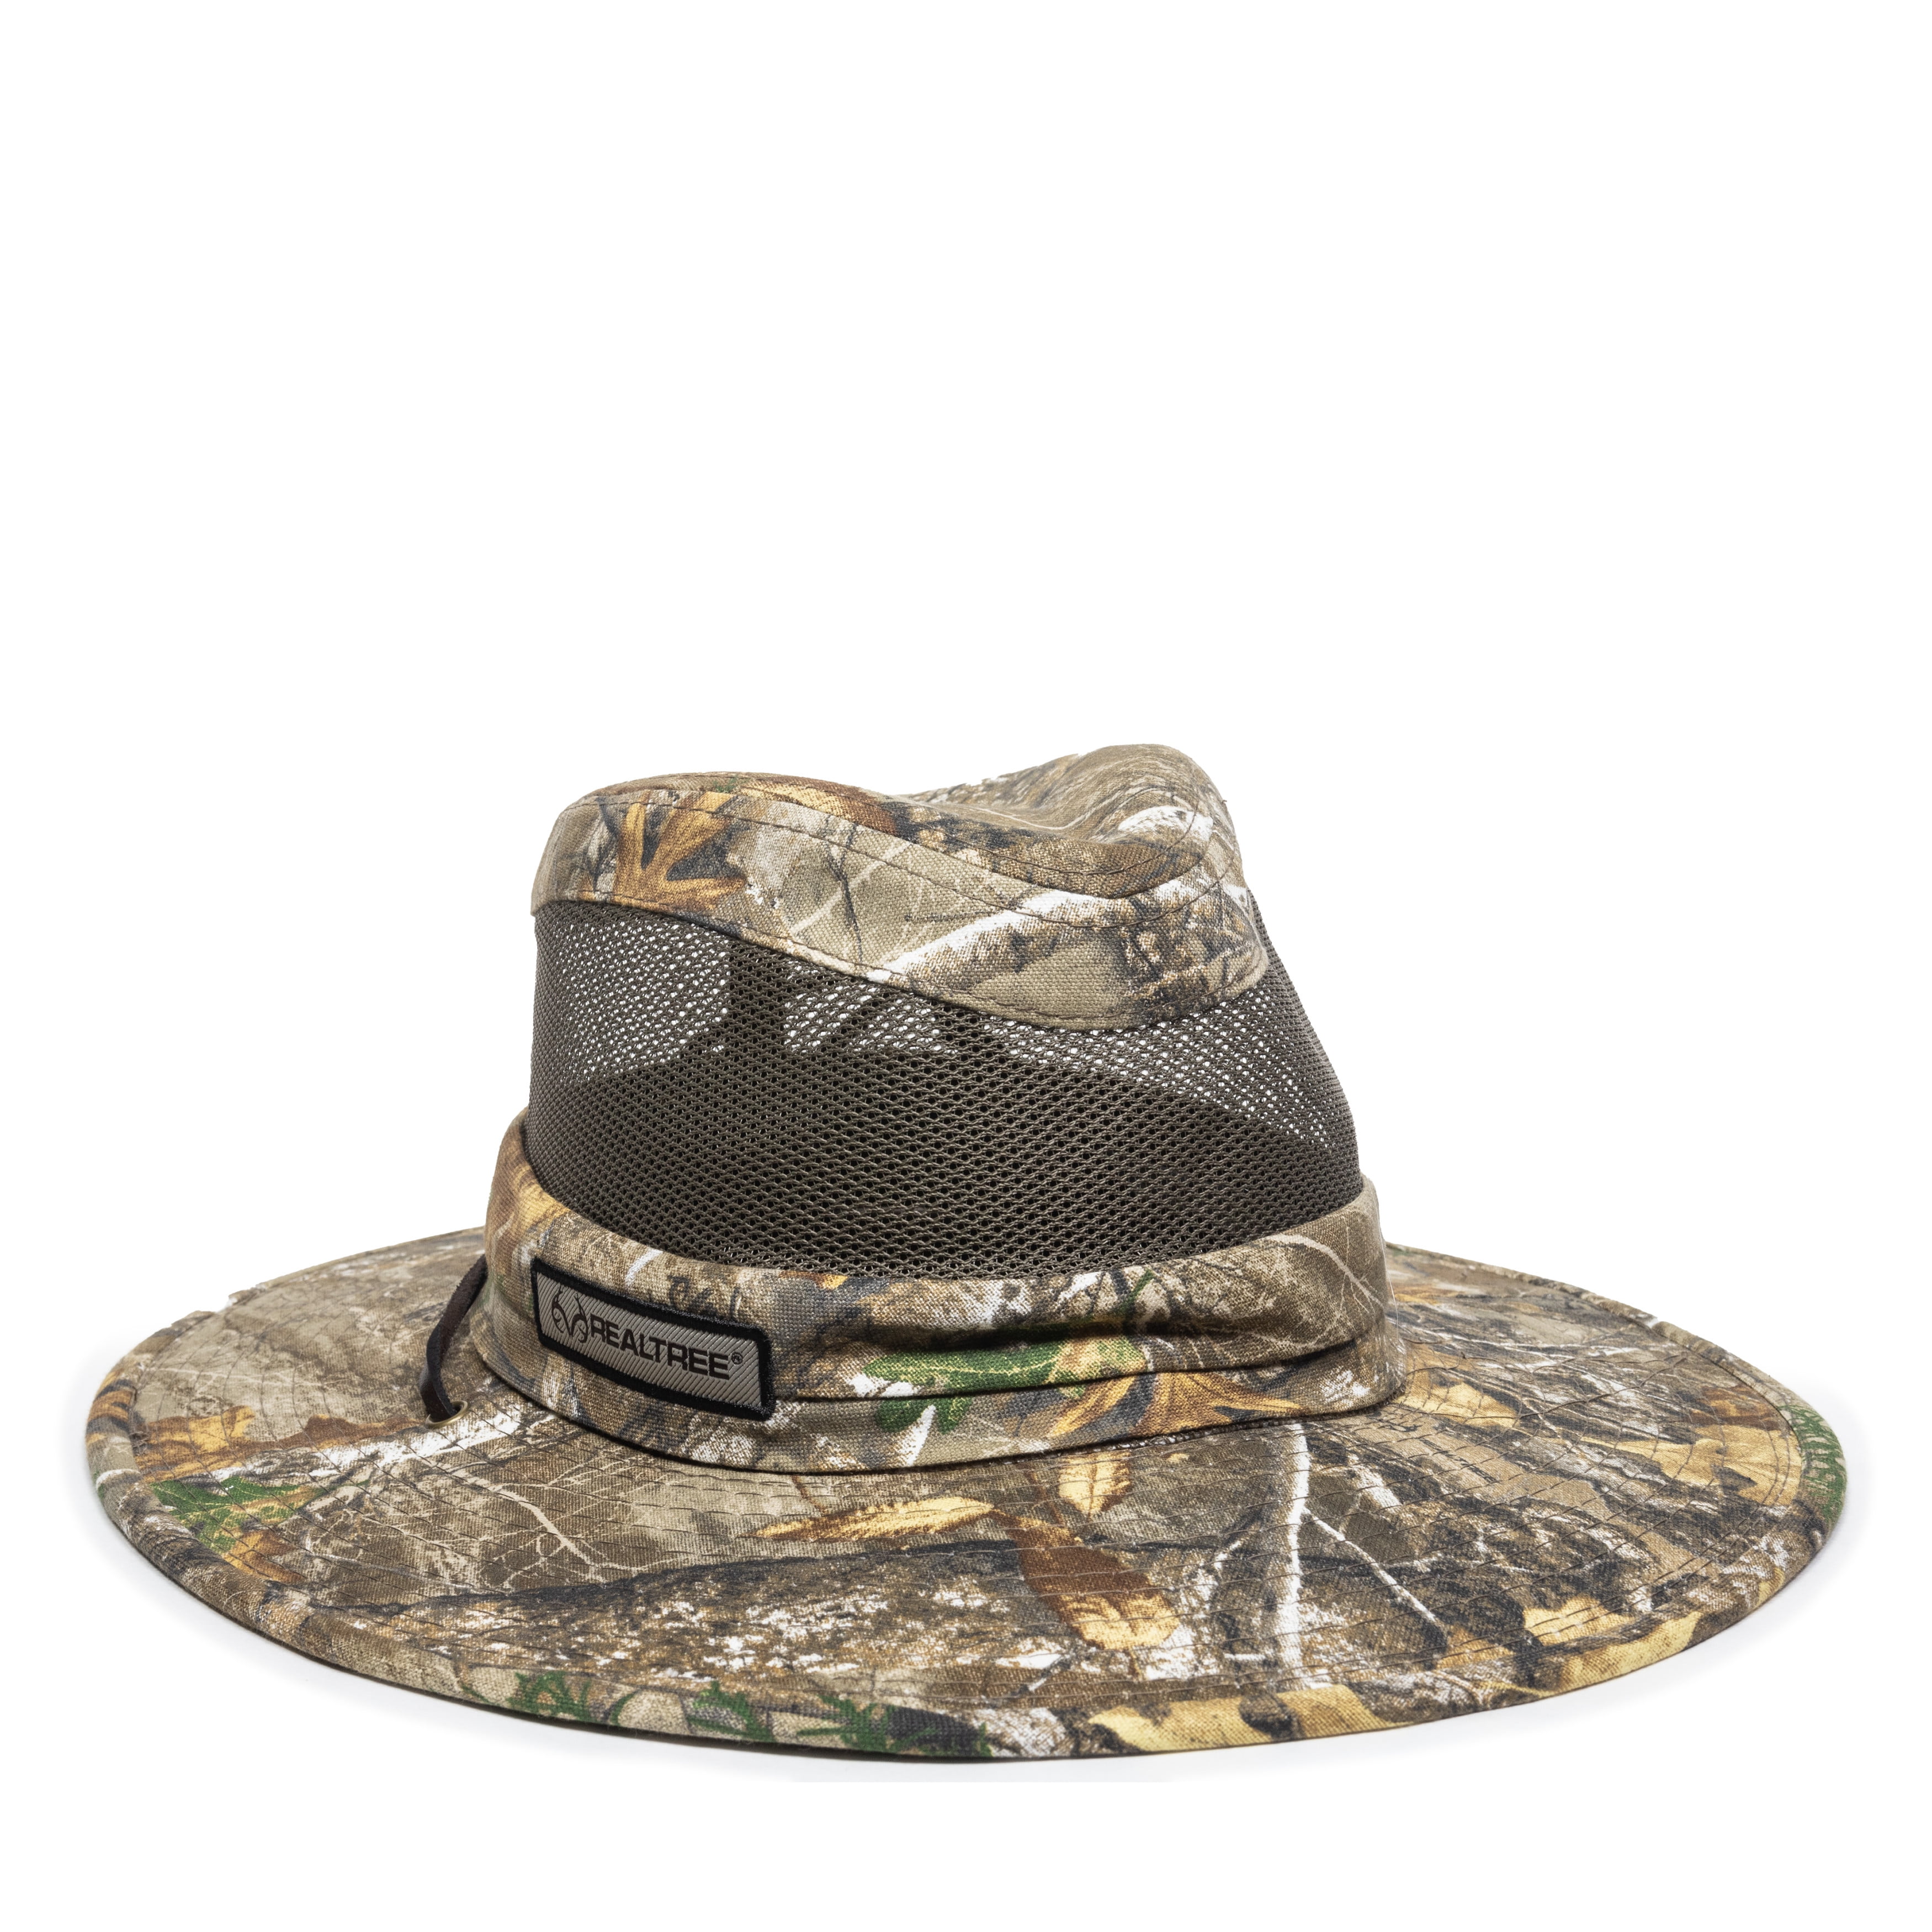 Men's Realtree Xtra Safari Boonie Fitted Hat Outdoors Fishing Hunt Size S-M 